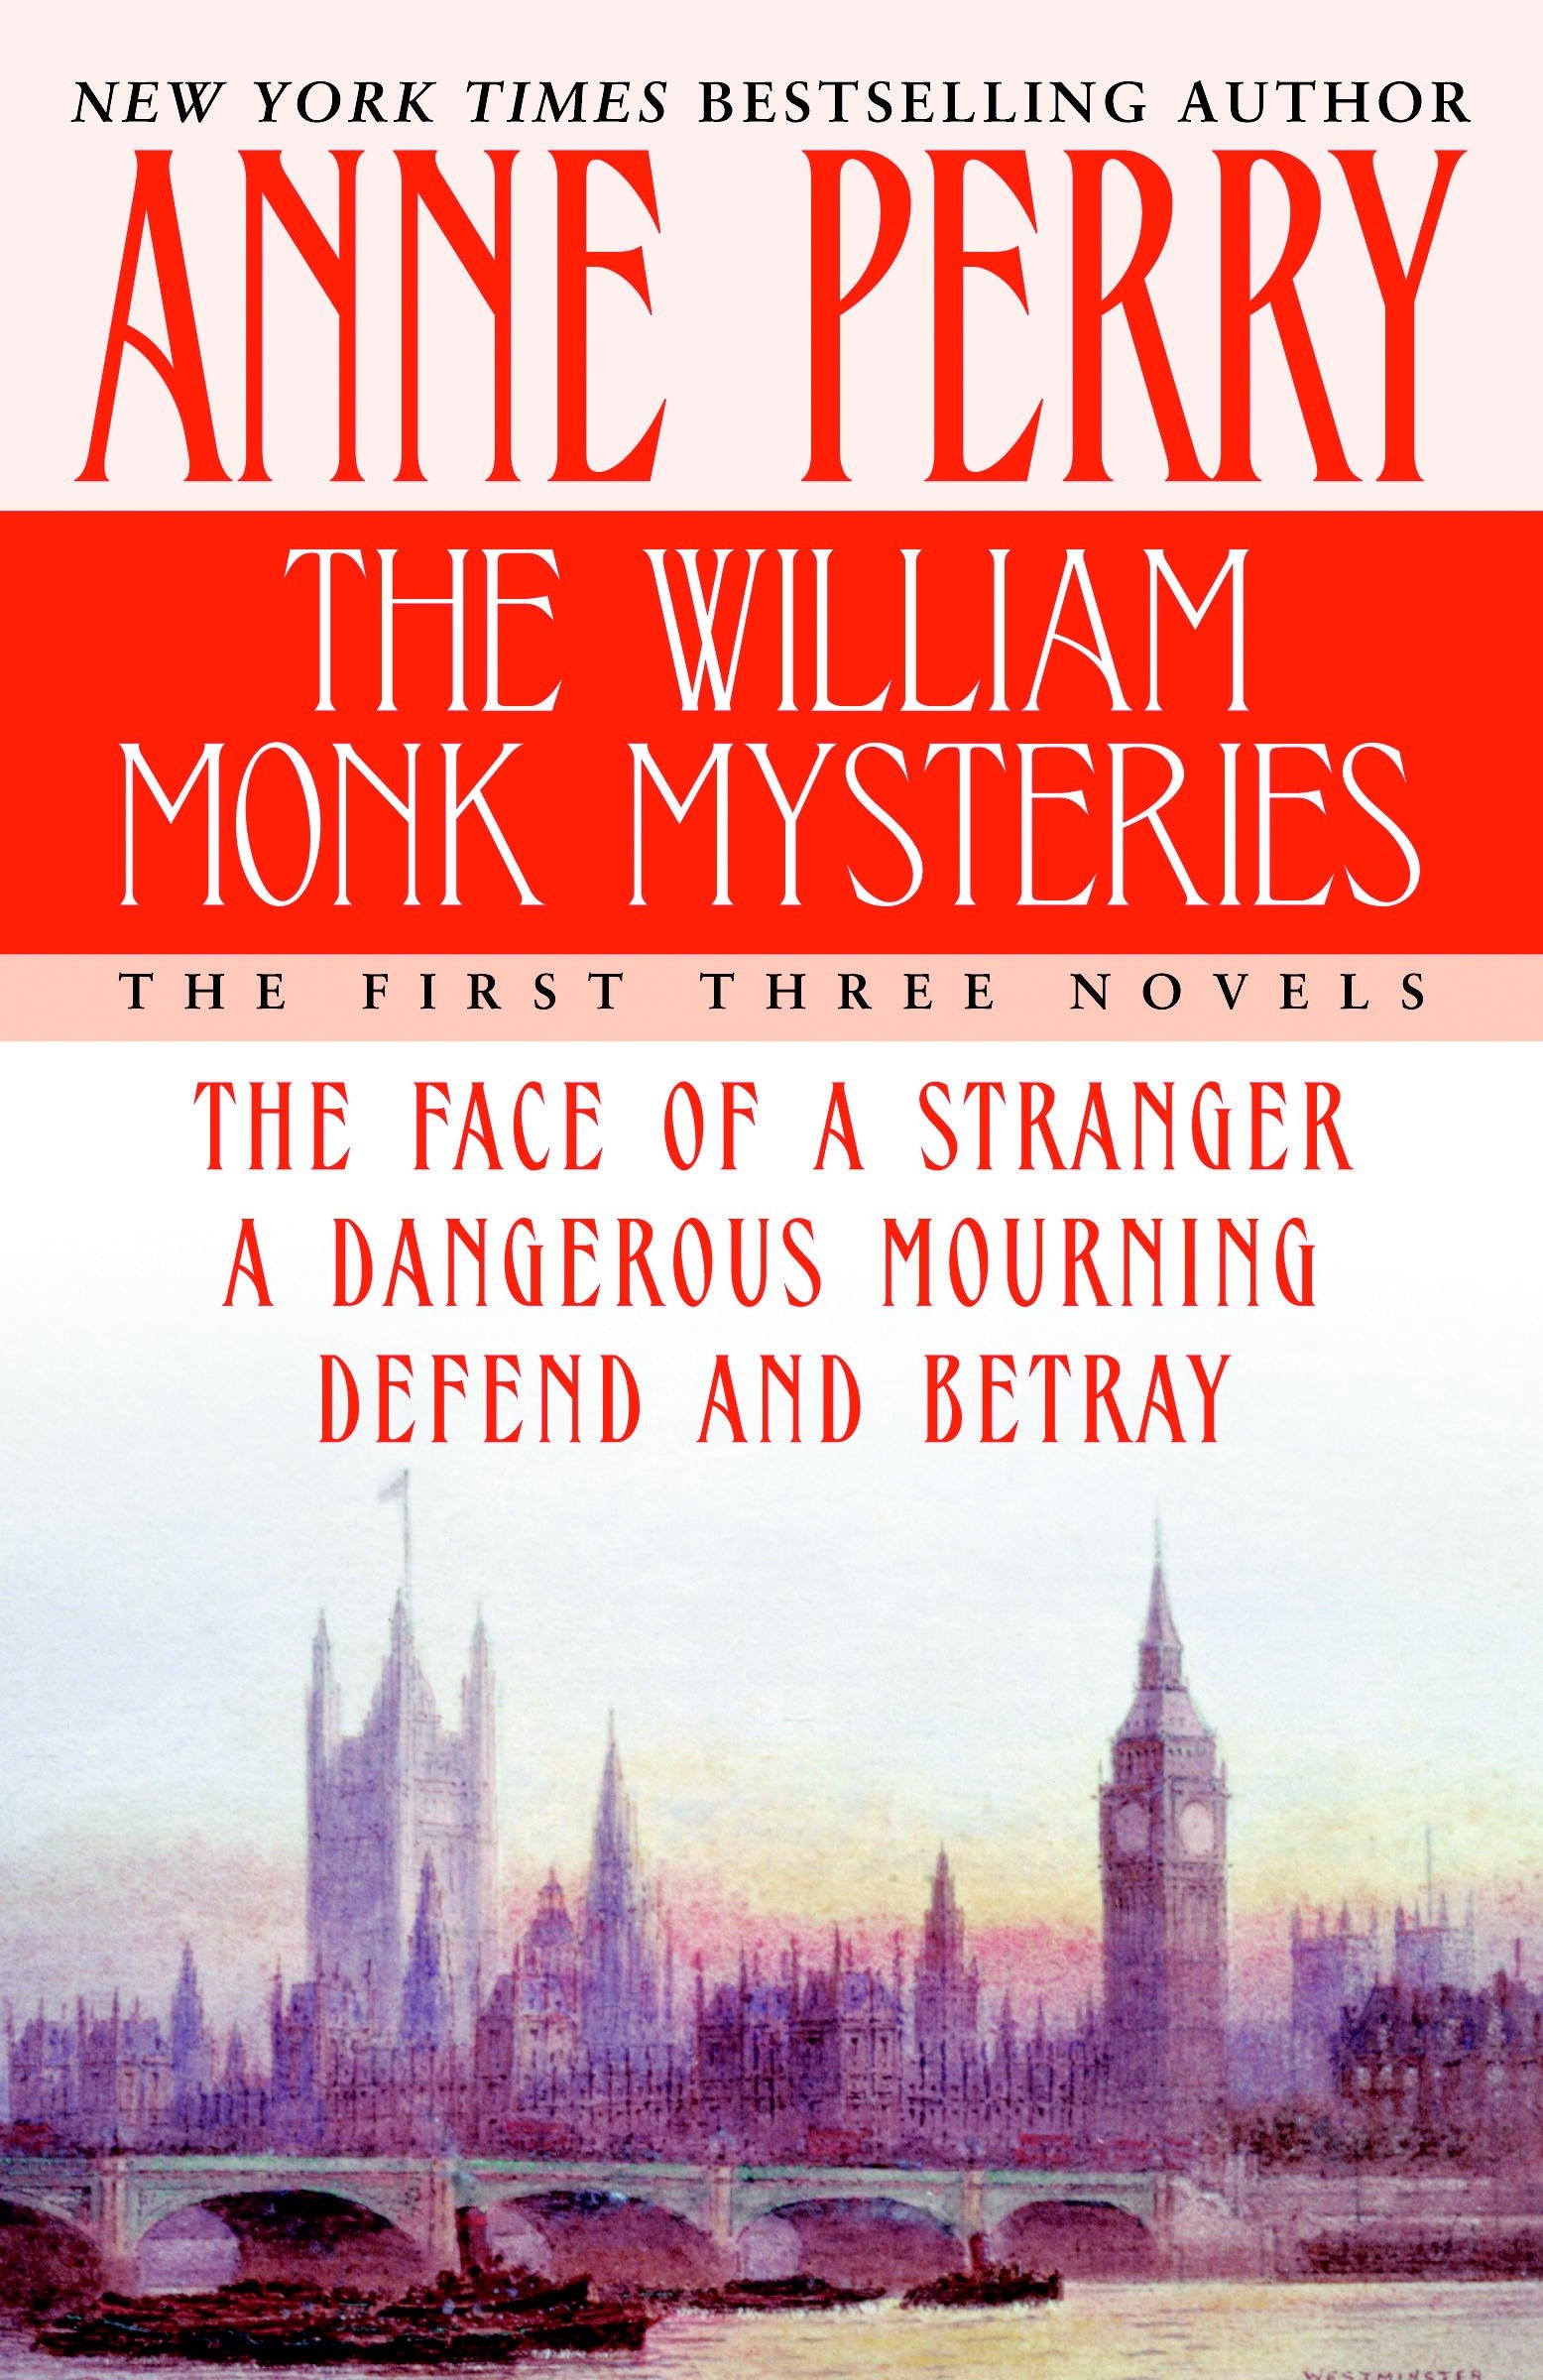 Image de couverture de The William Monk Mysteries [electronic resource] : The First Three Novels